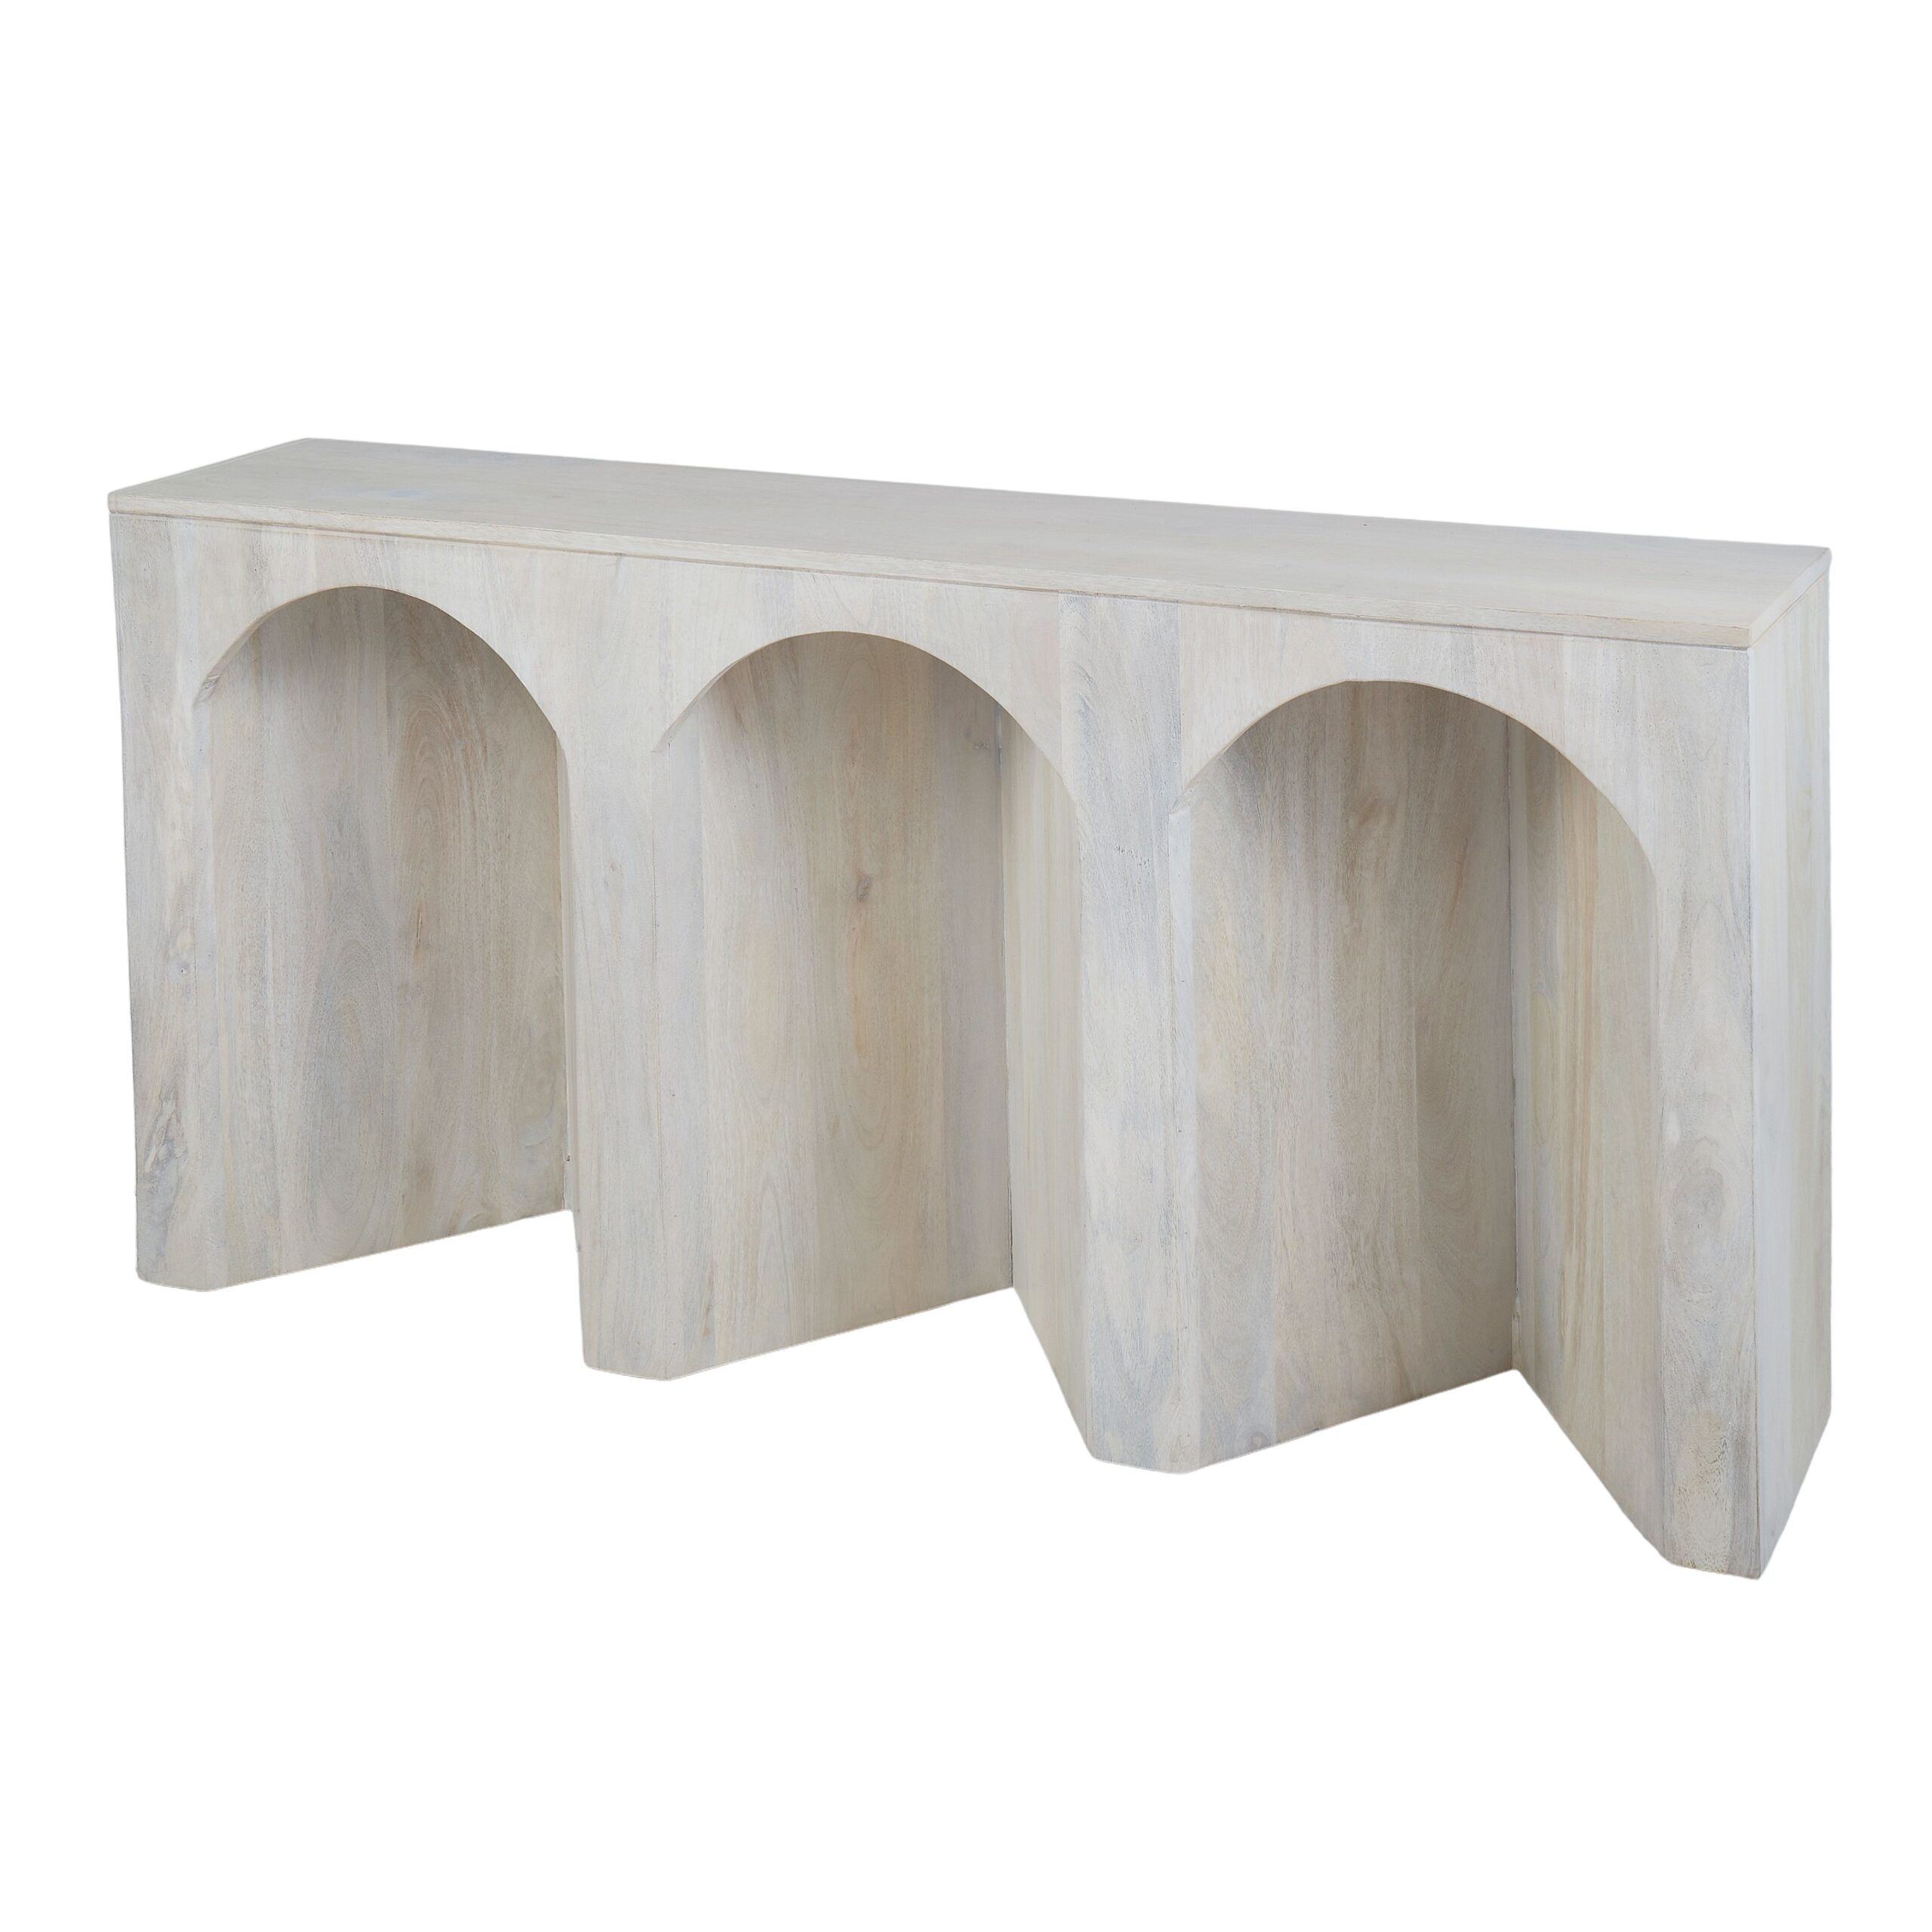 ARCH WOOD CONSOLE TABLE WHITE LIME WASH 150X30X76CM